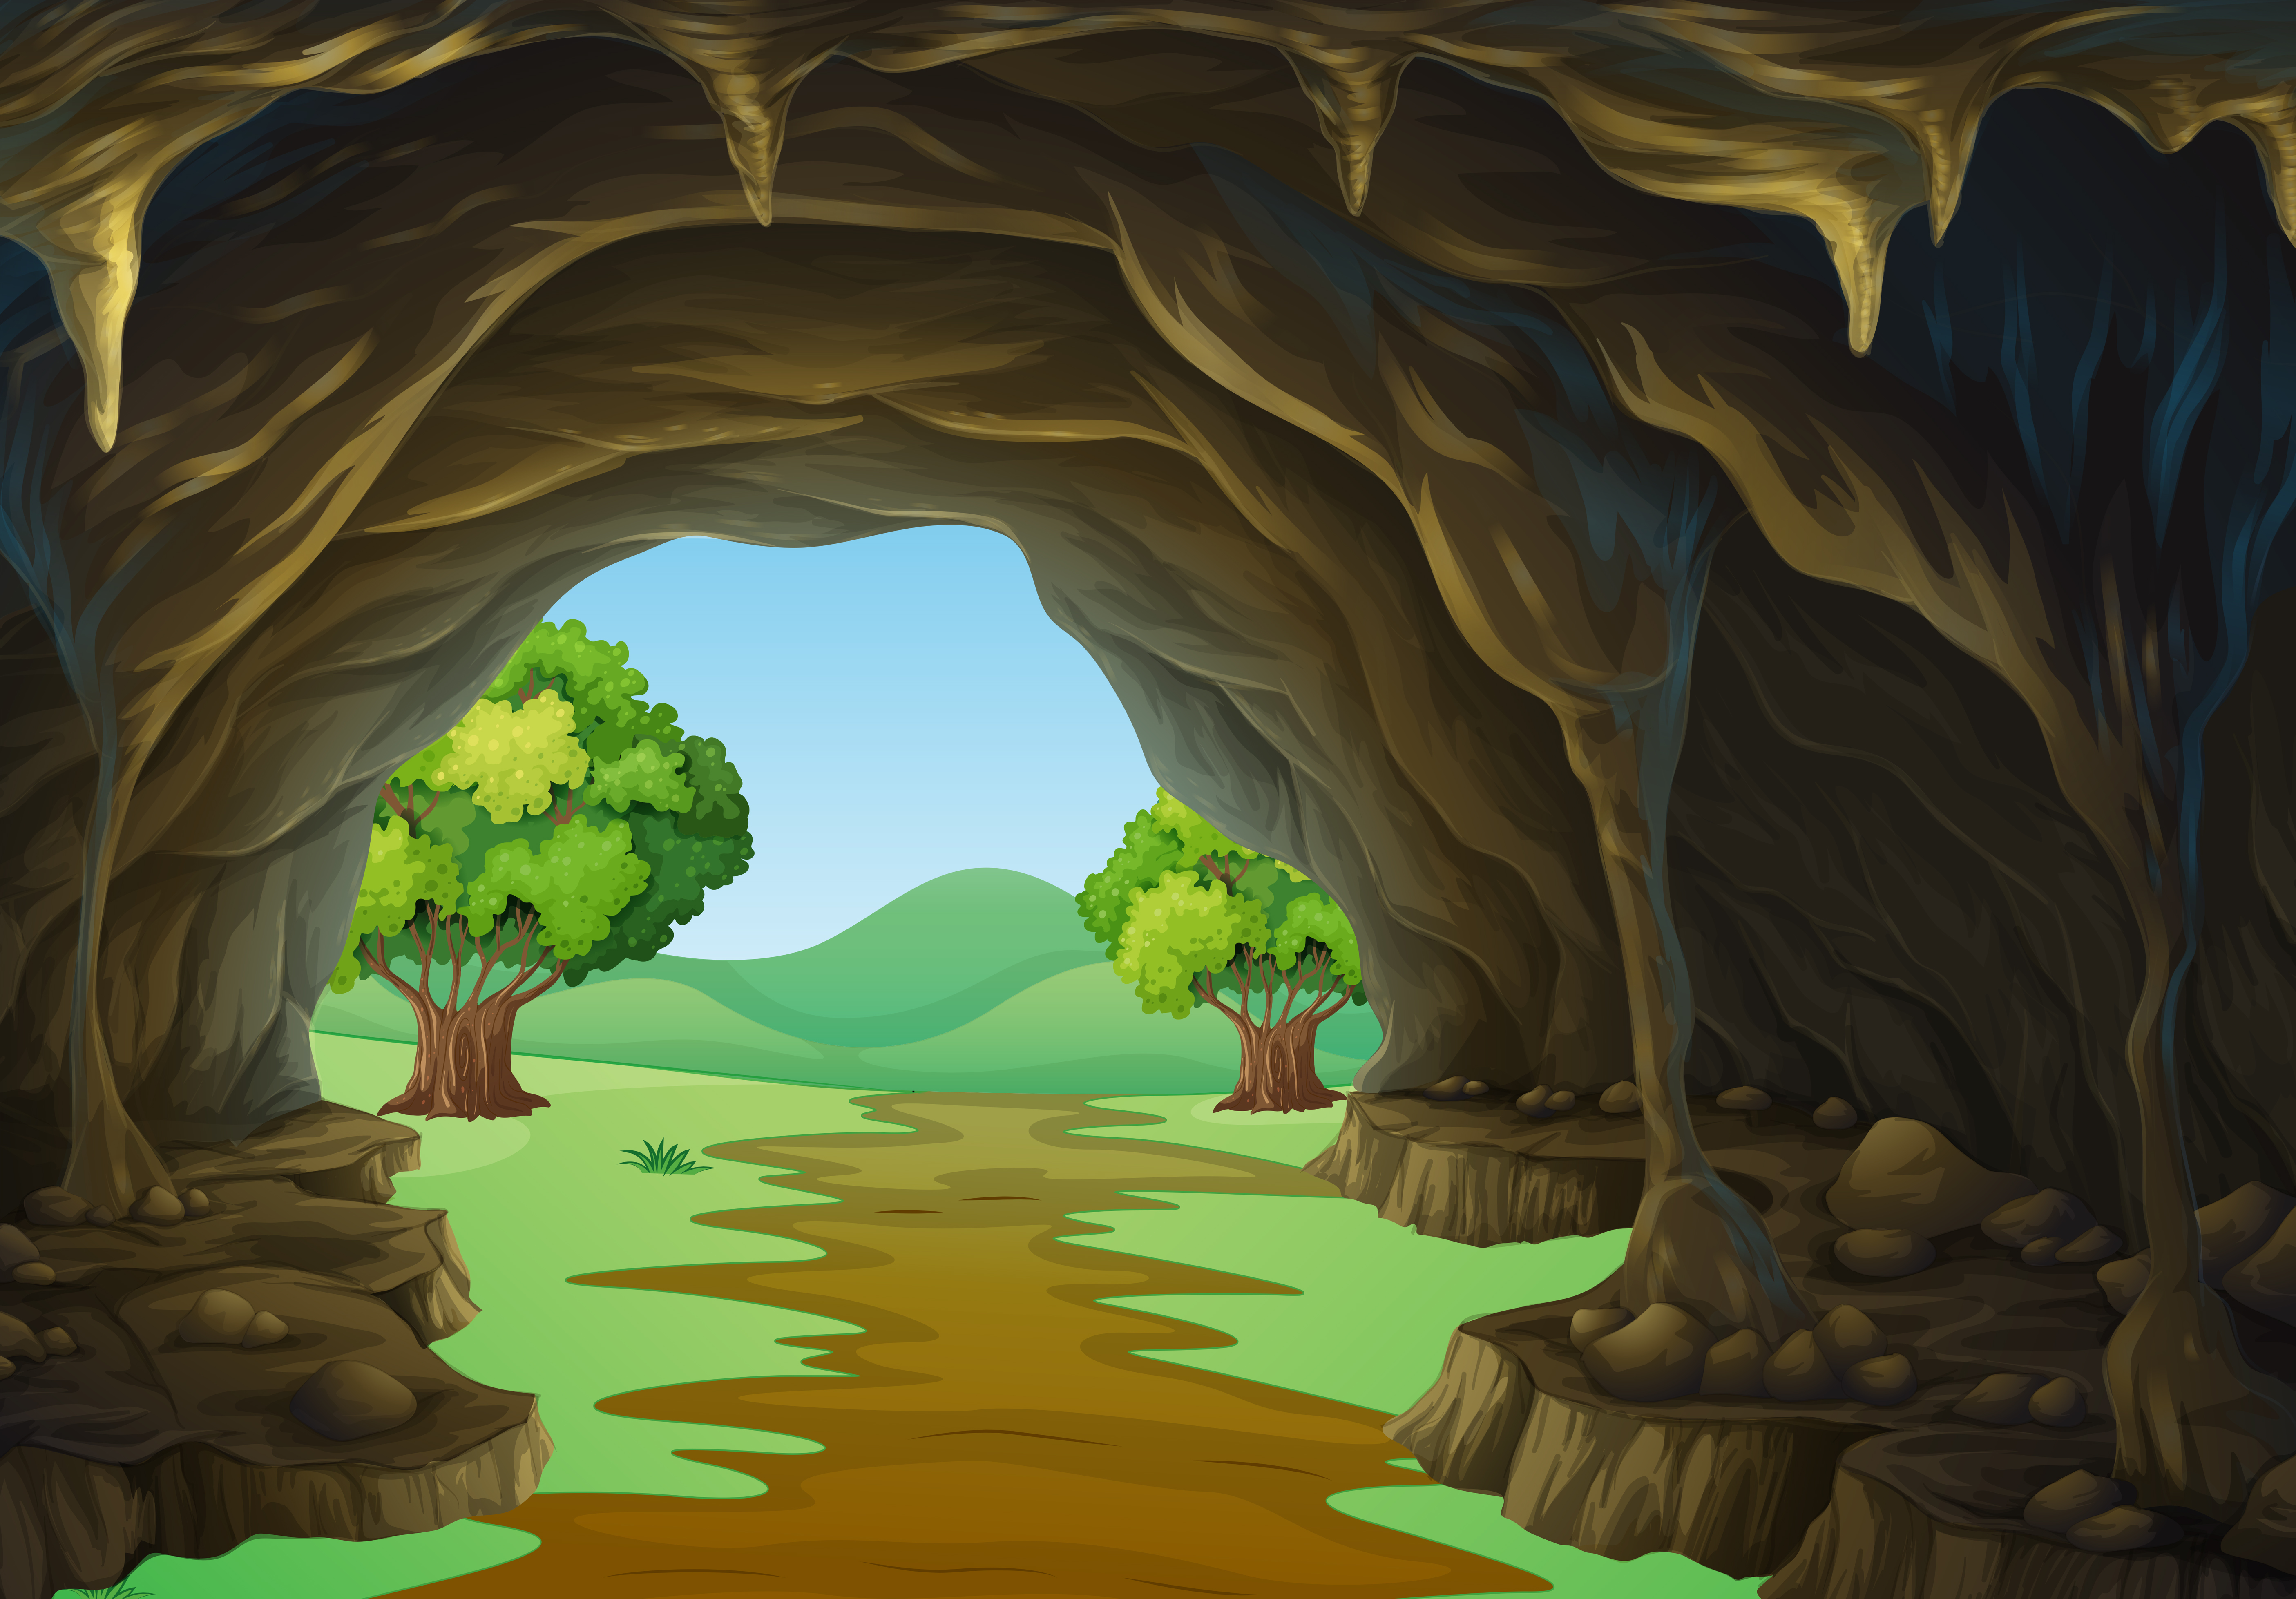 Nature scene of cave and trail 434350 Download Free Vectors Clipart Graphics & Vector Art